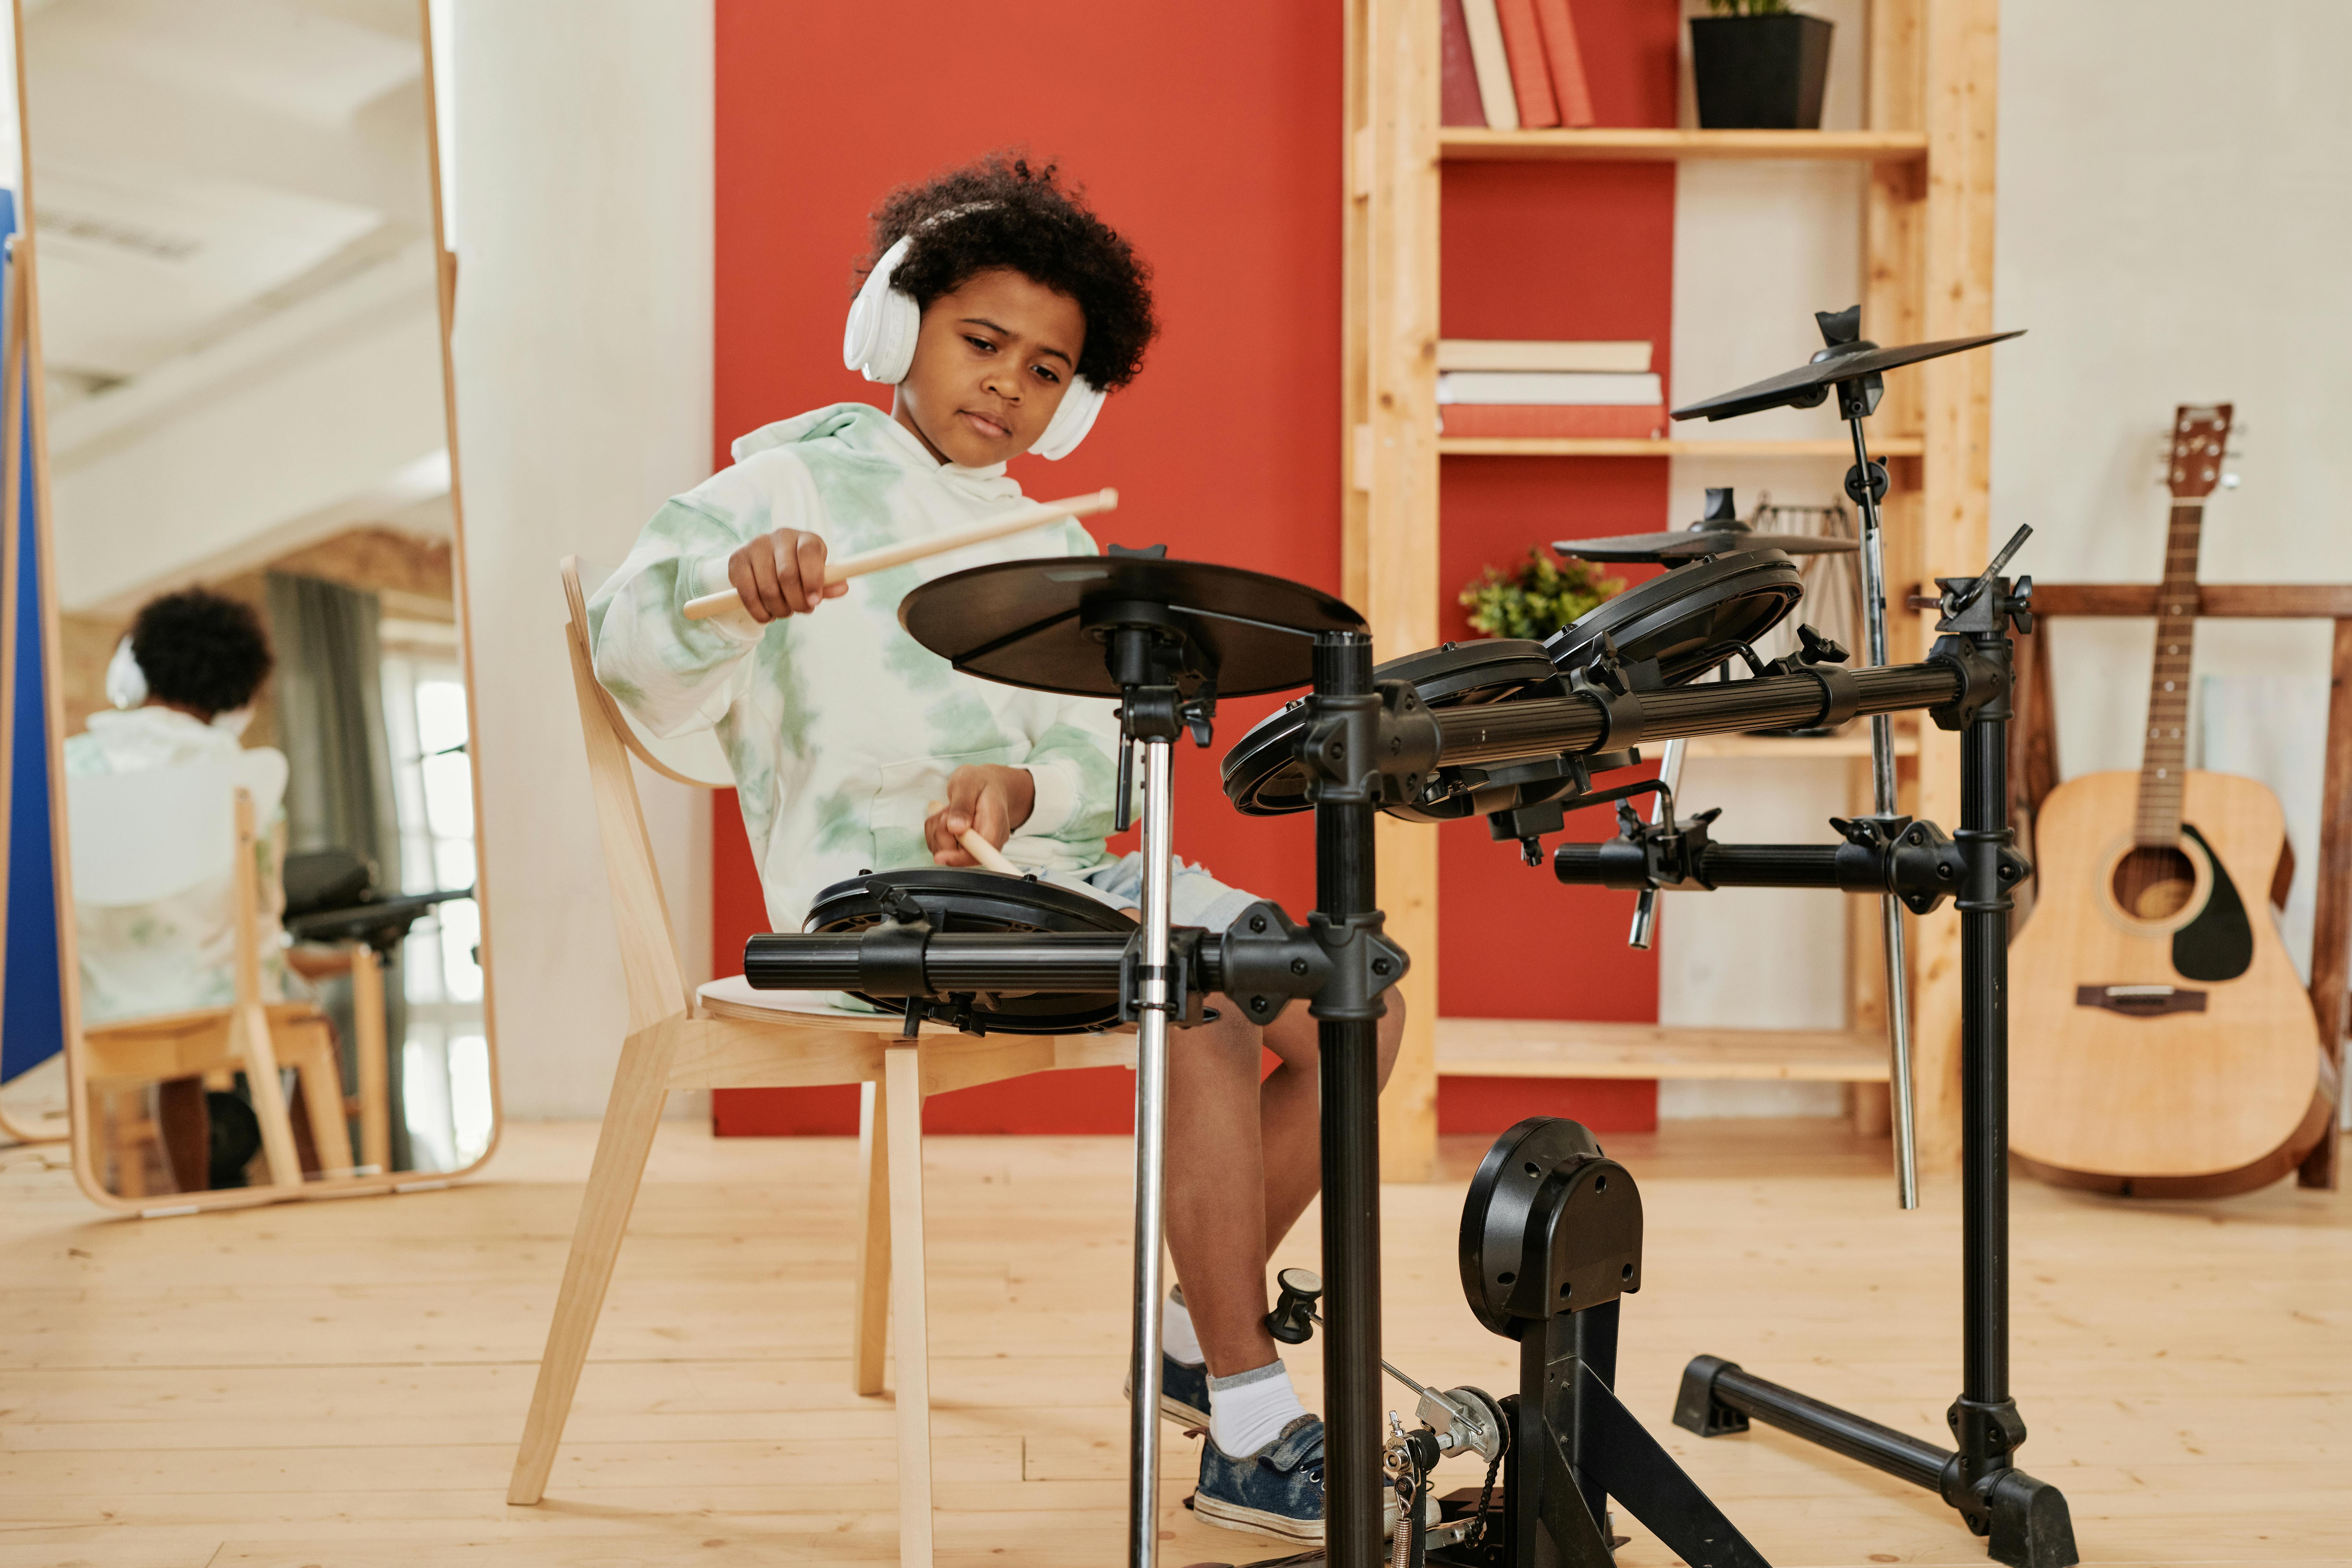 Free A Boy Playing Electric Drums Stock Photo